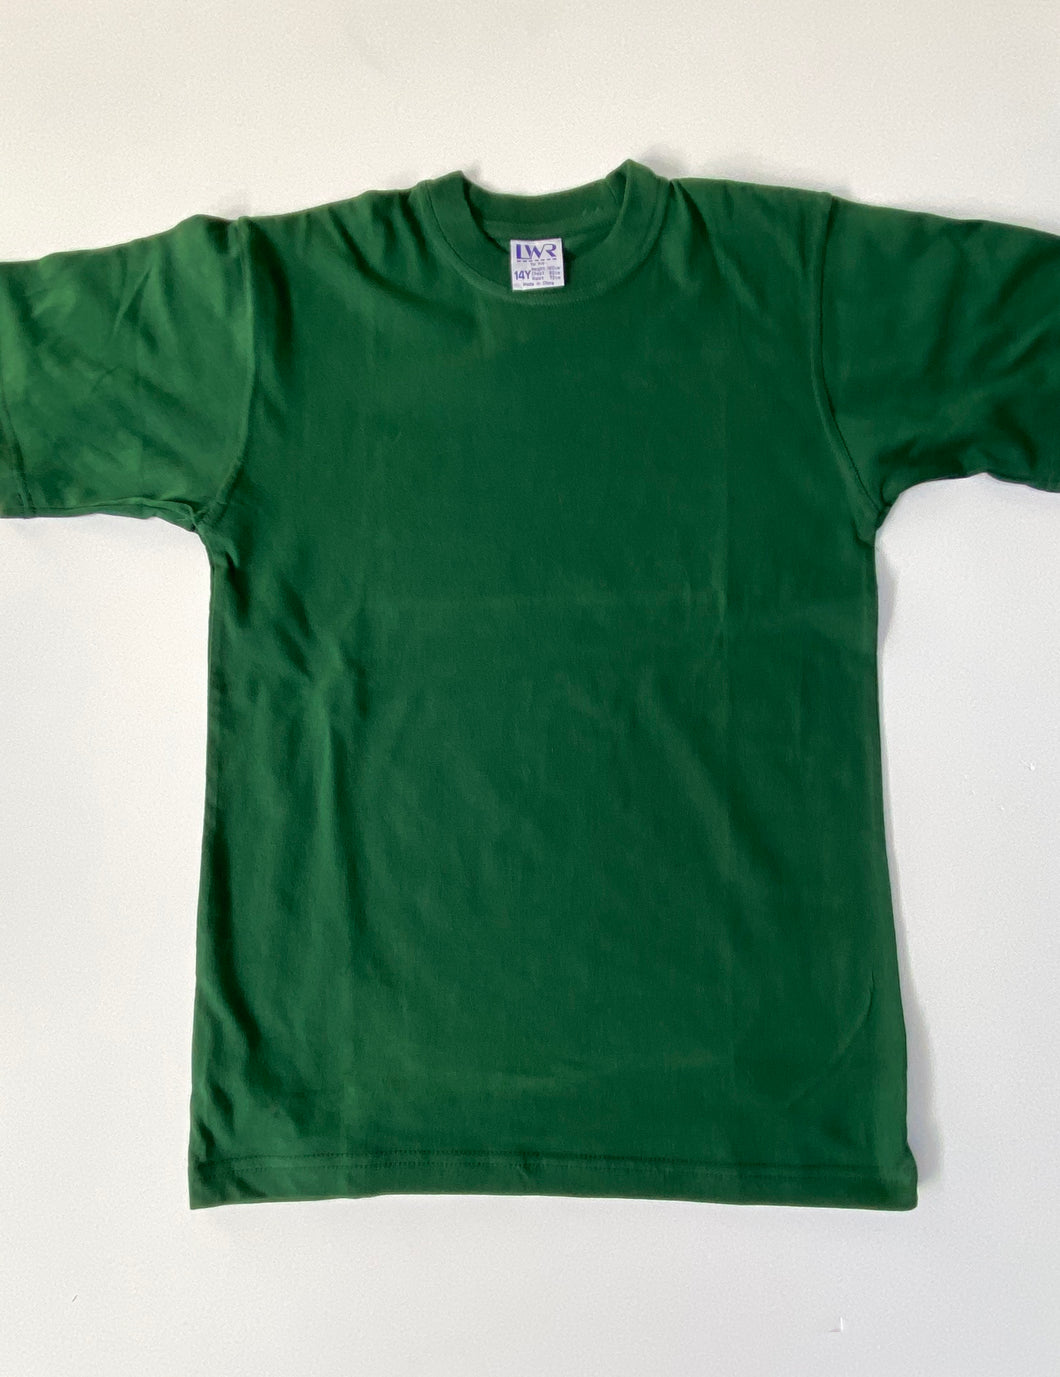 Green House T-Shirt - Old stock